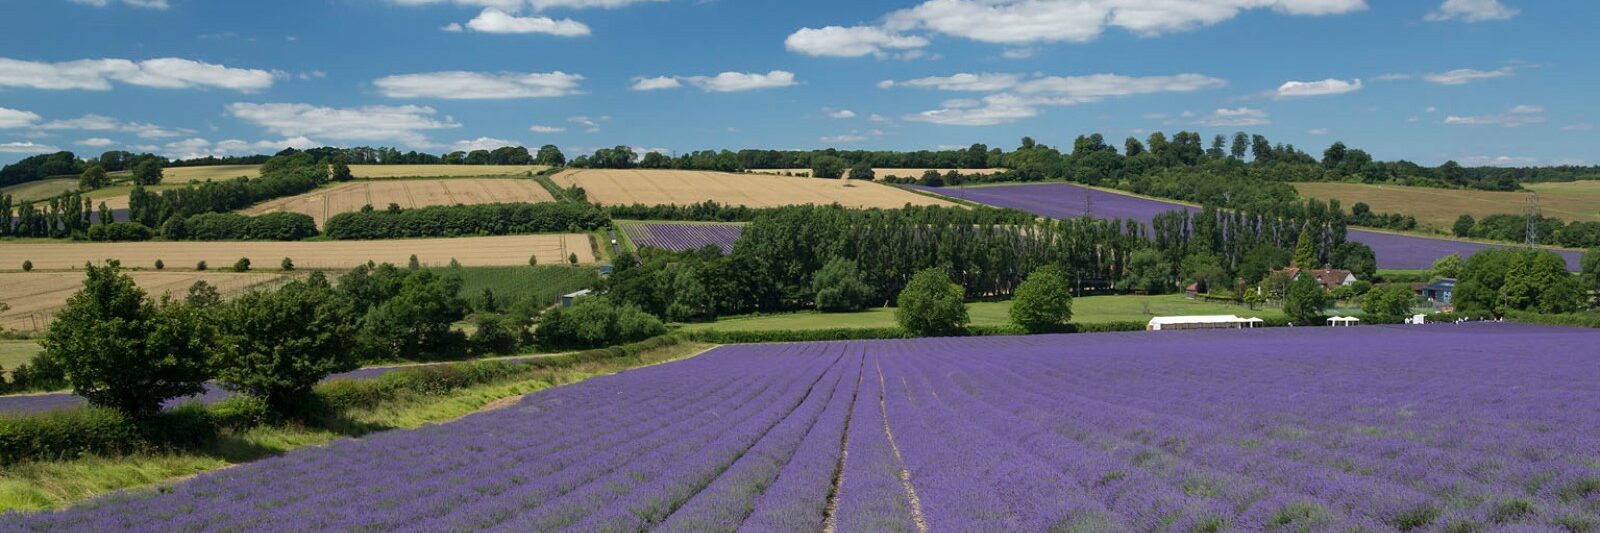 Lavender fields with woodlands and crop fields in background, on a sunny day.